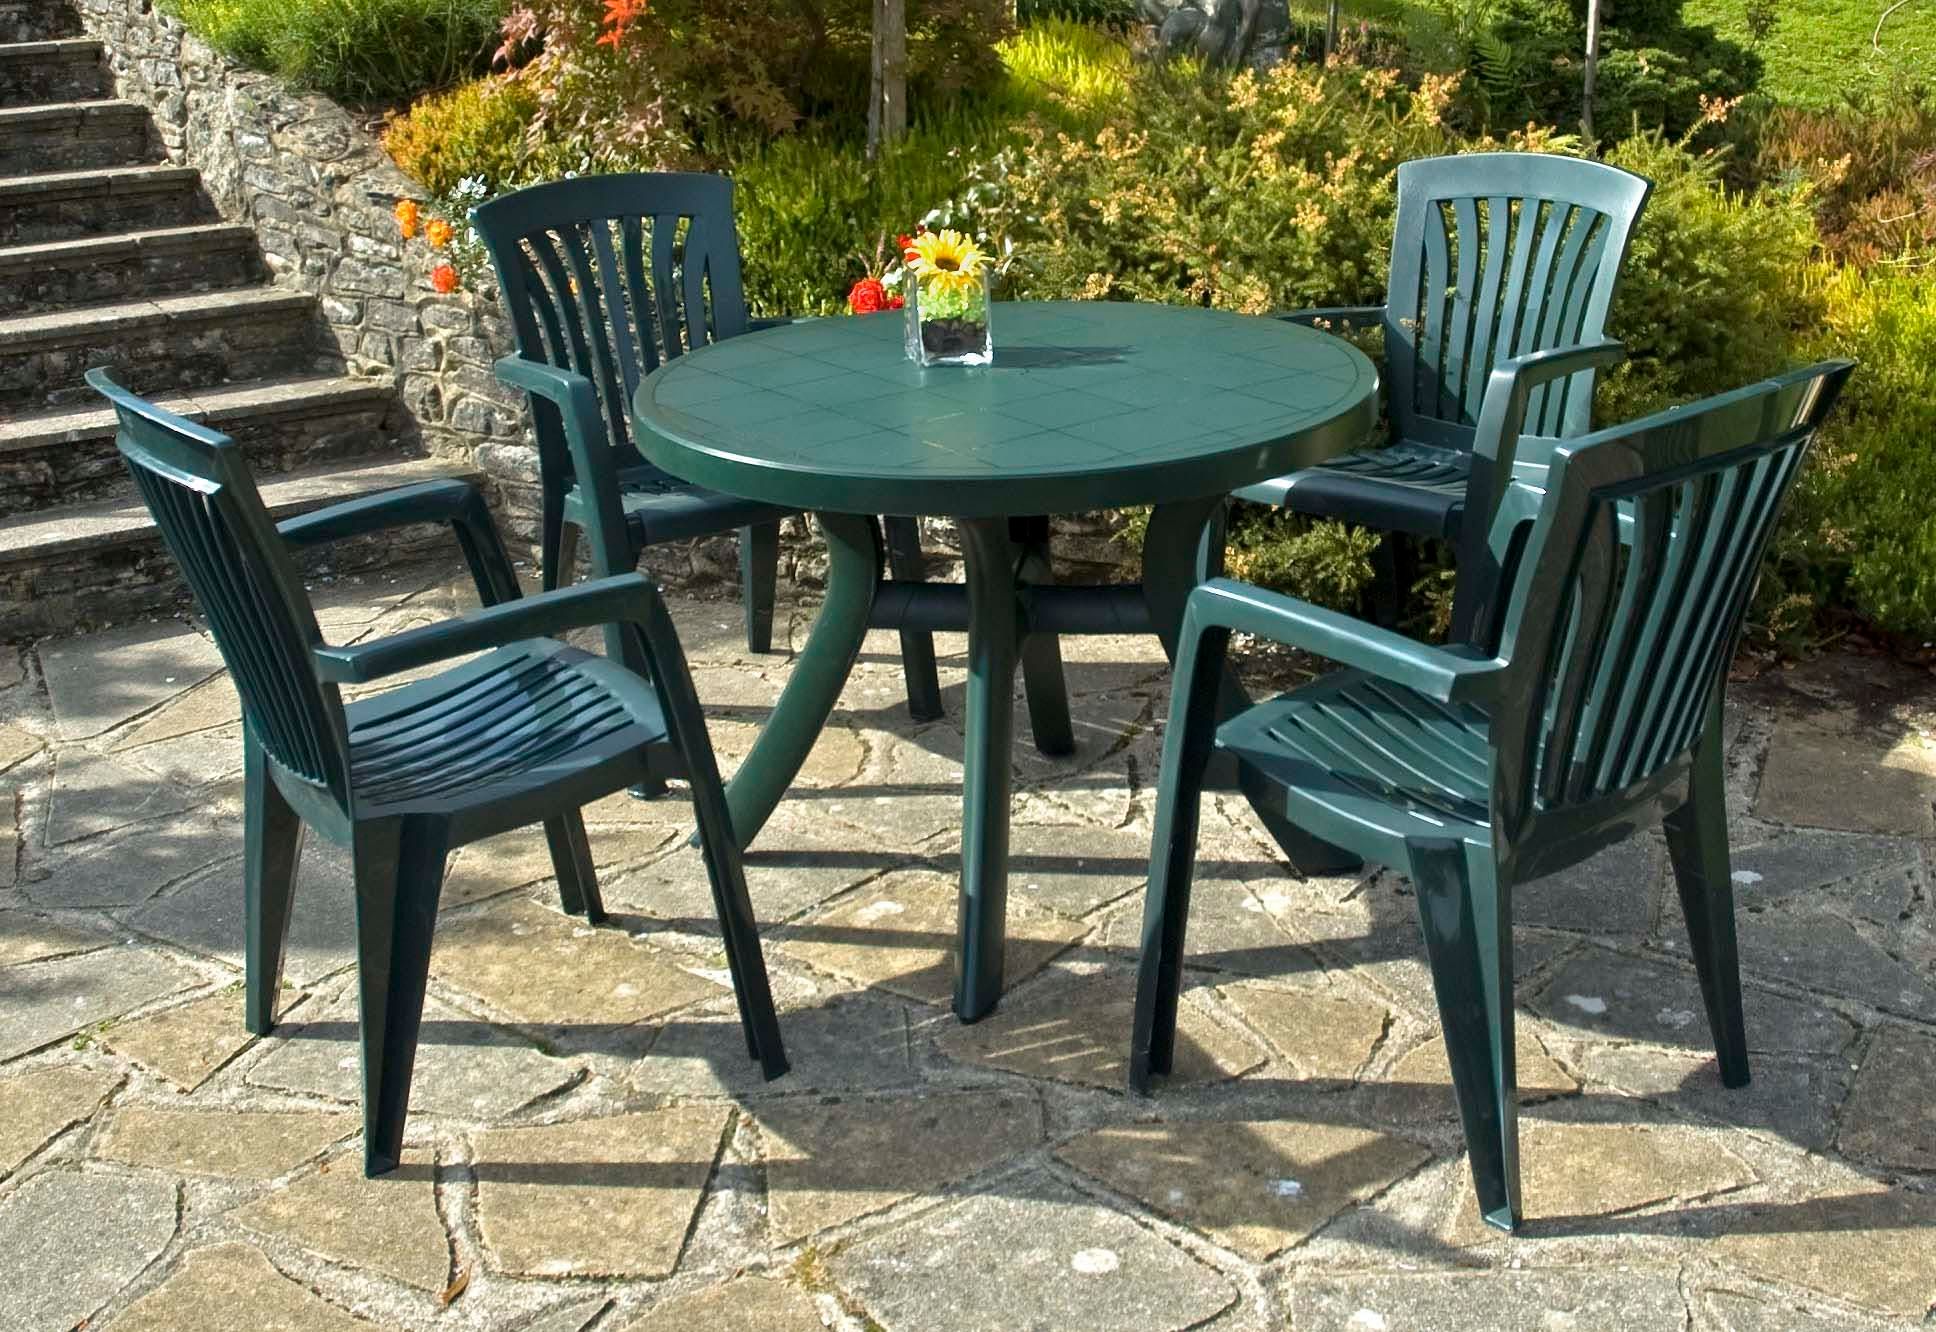 Plastic Patio Chairs For Outdoor Furniture (View 1 of 5)